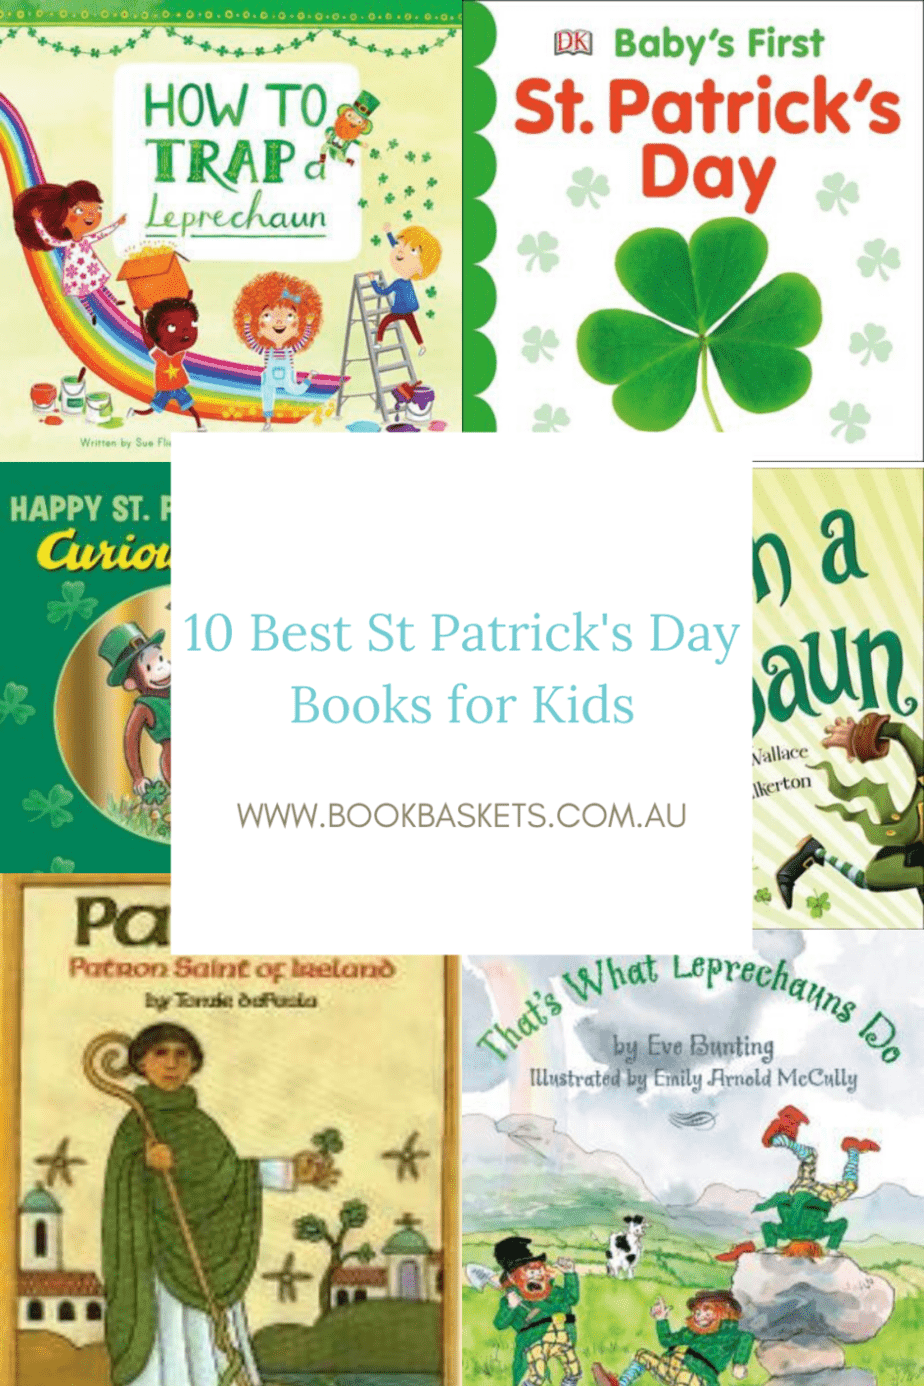 10-best-st-patricks-day-books-for-kids-the-book-basket-company